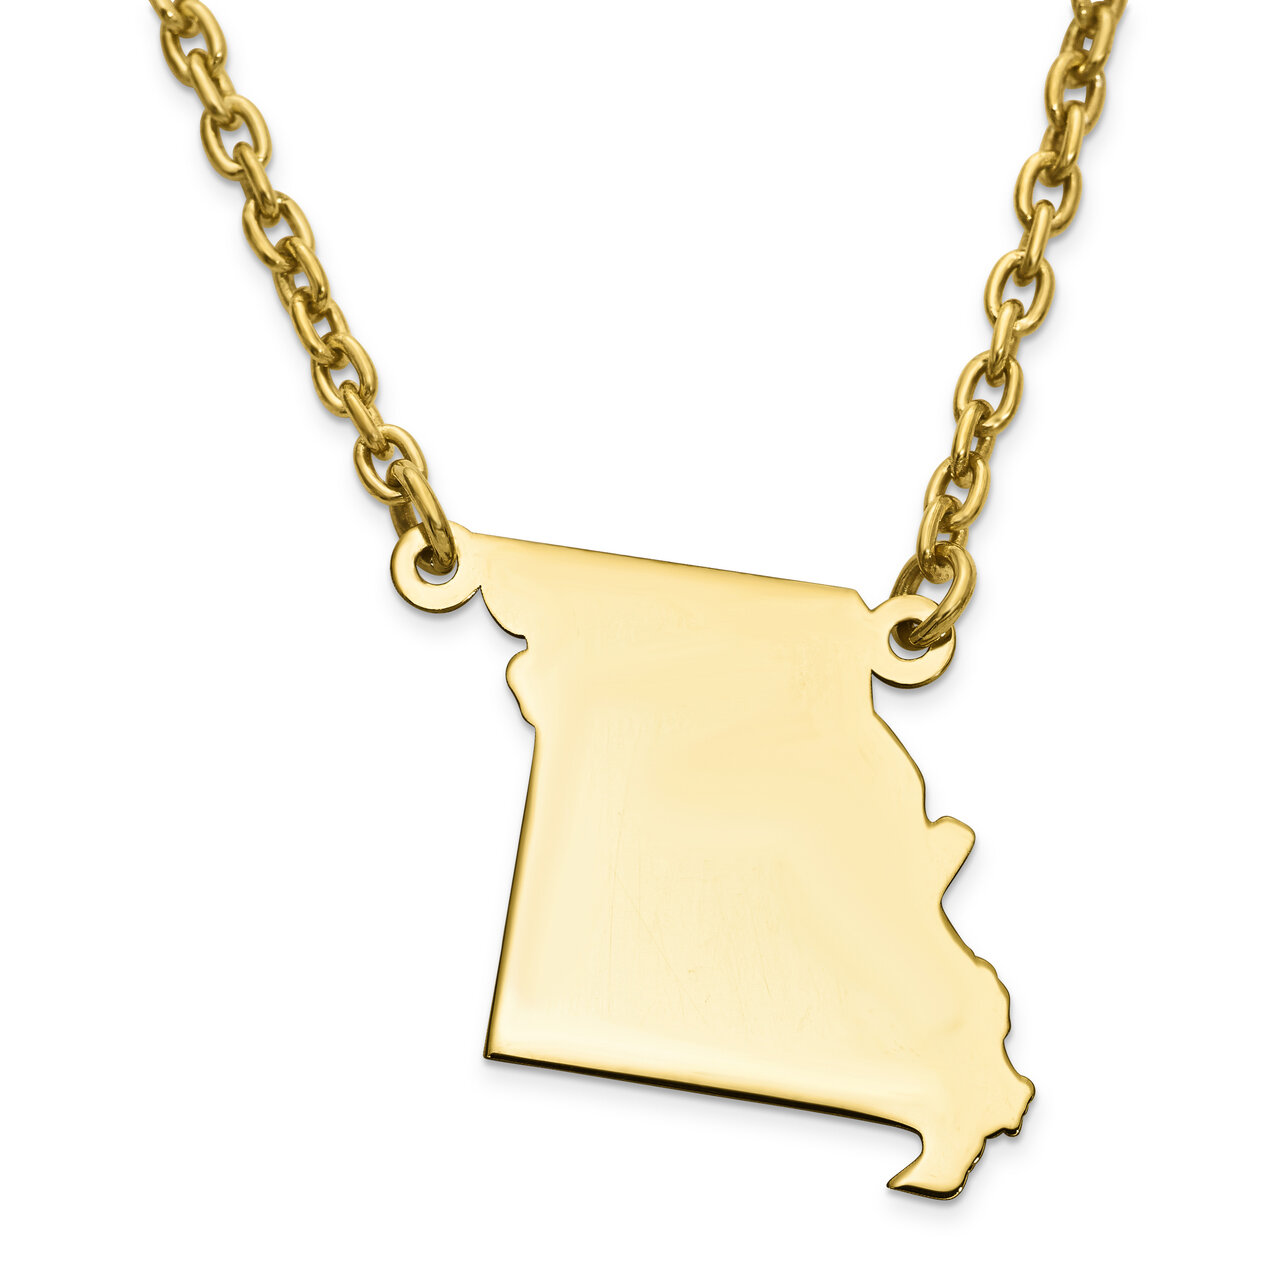 Missouri State Pendant Necklace with Chain 14k Yellow Gold Engravable XNA706Y-MO